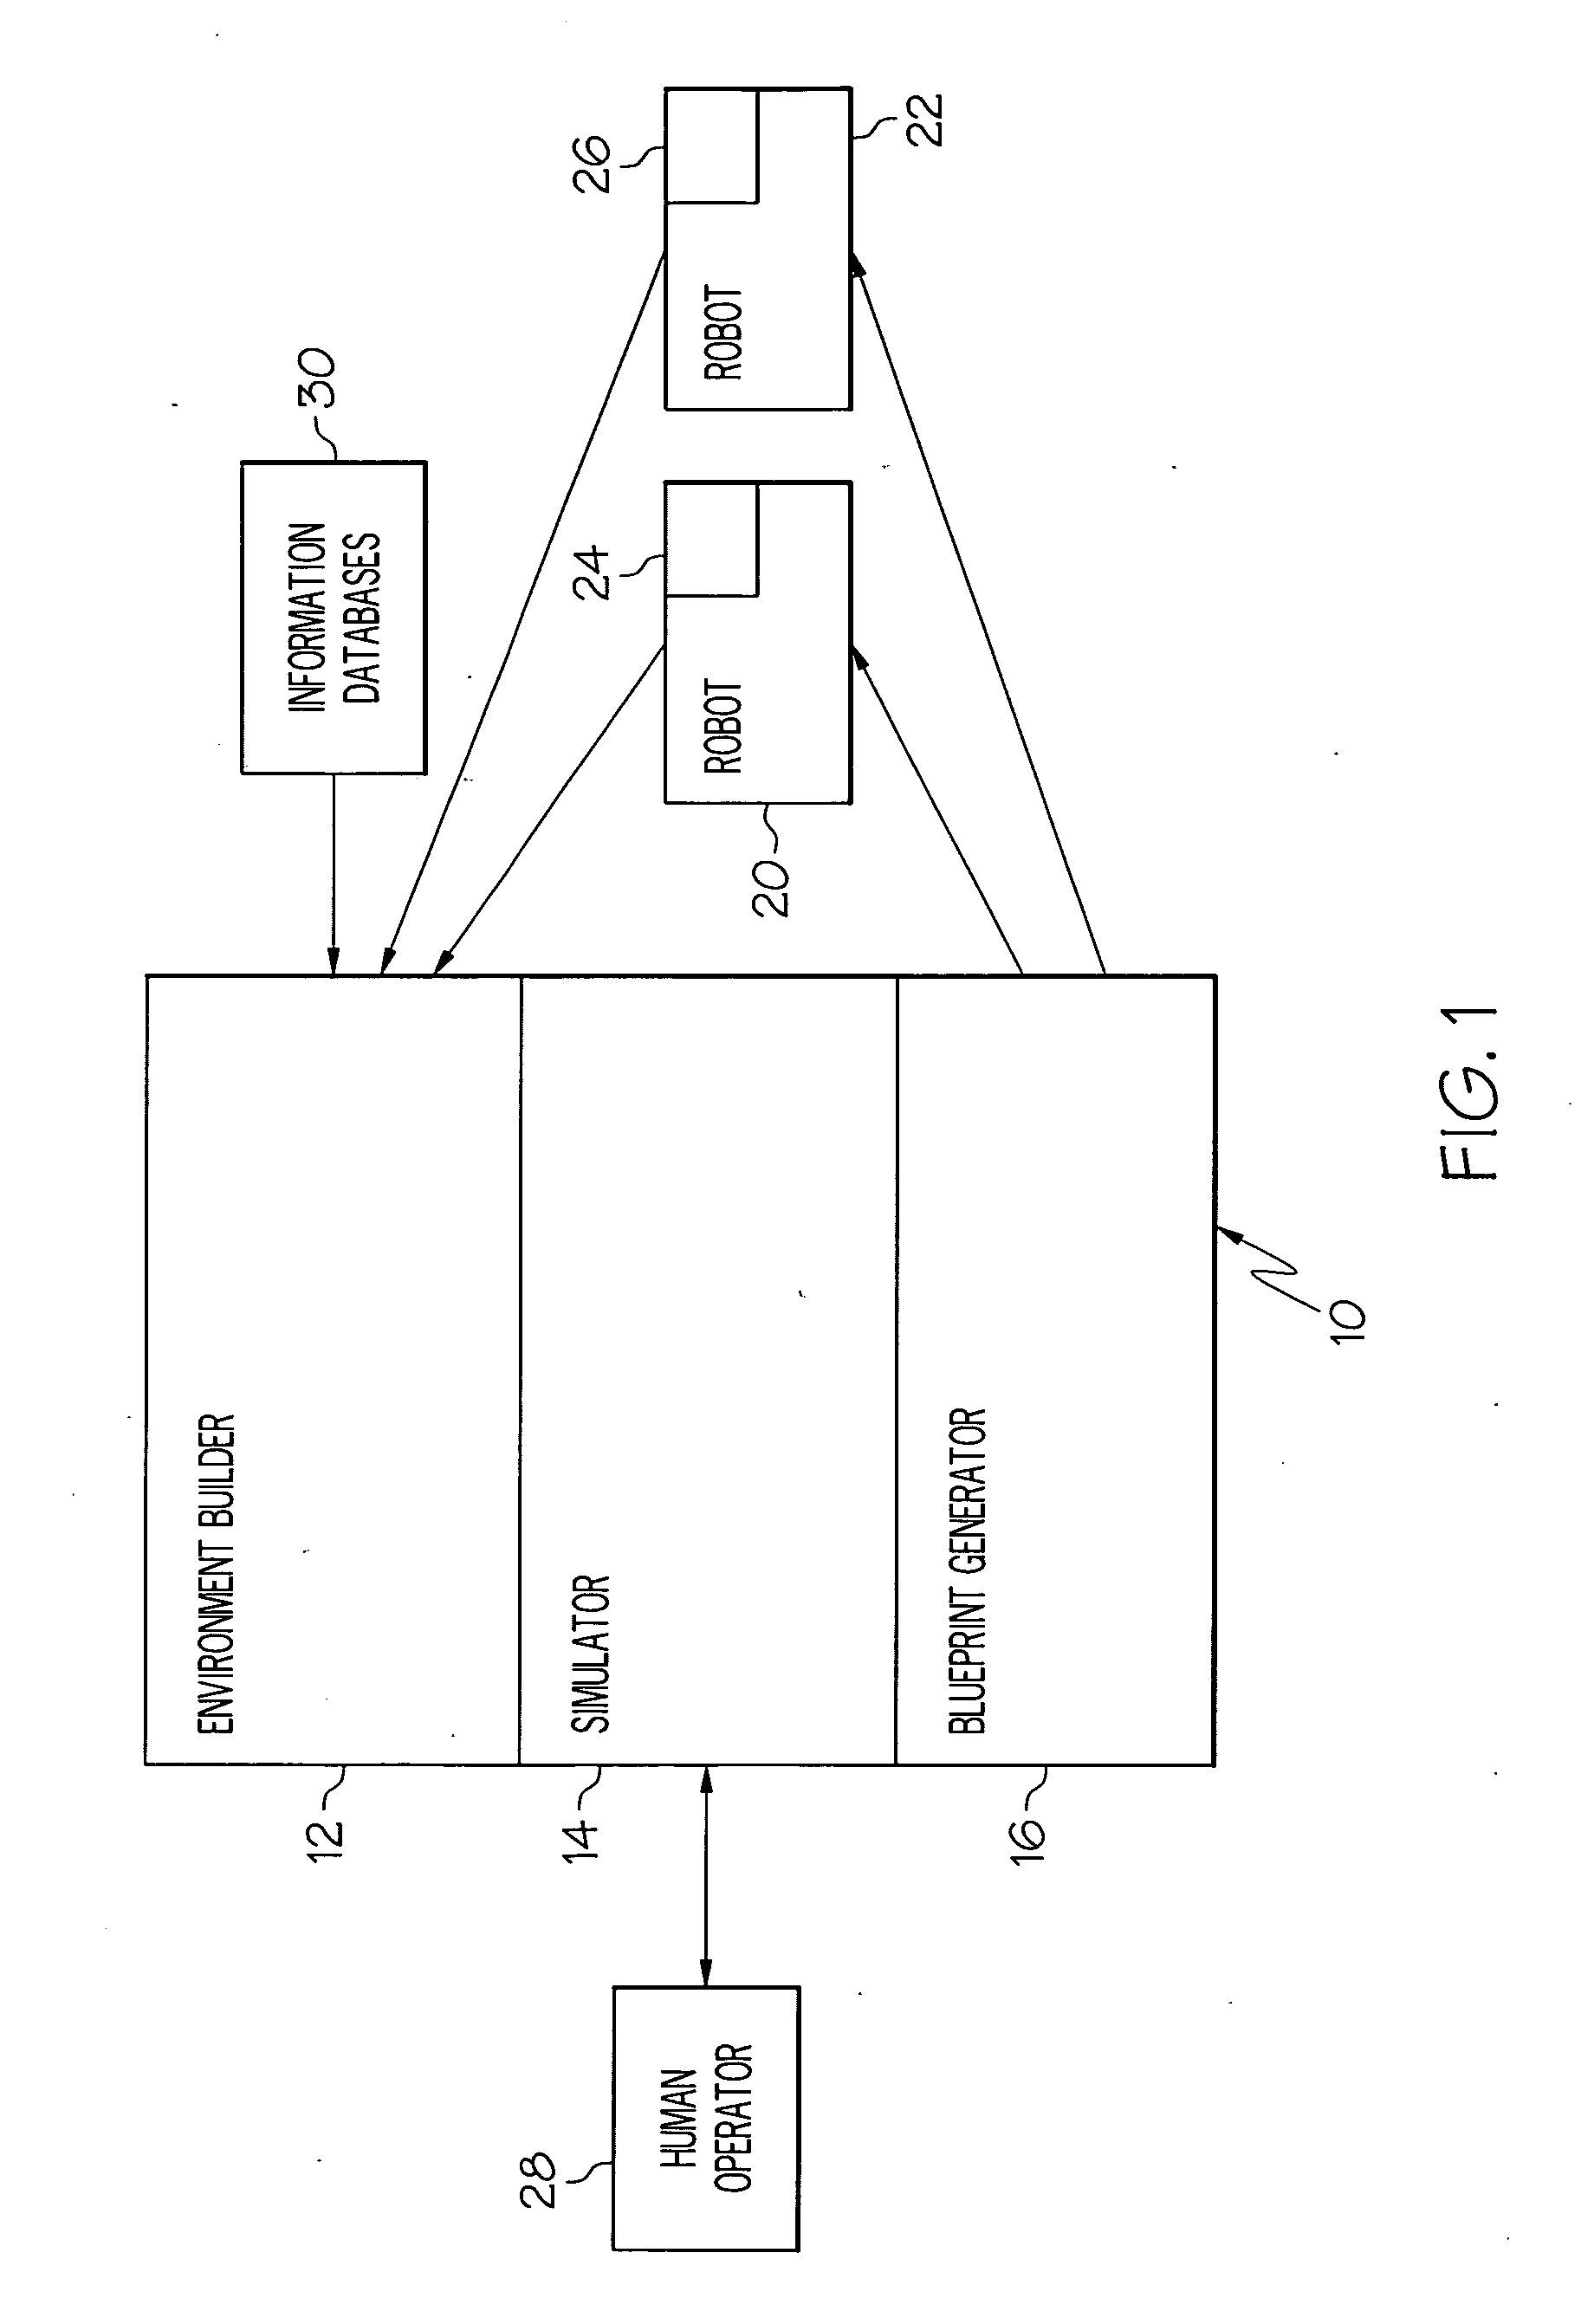 System and method for generating instructions for a robot